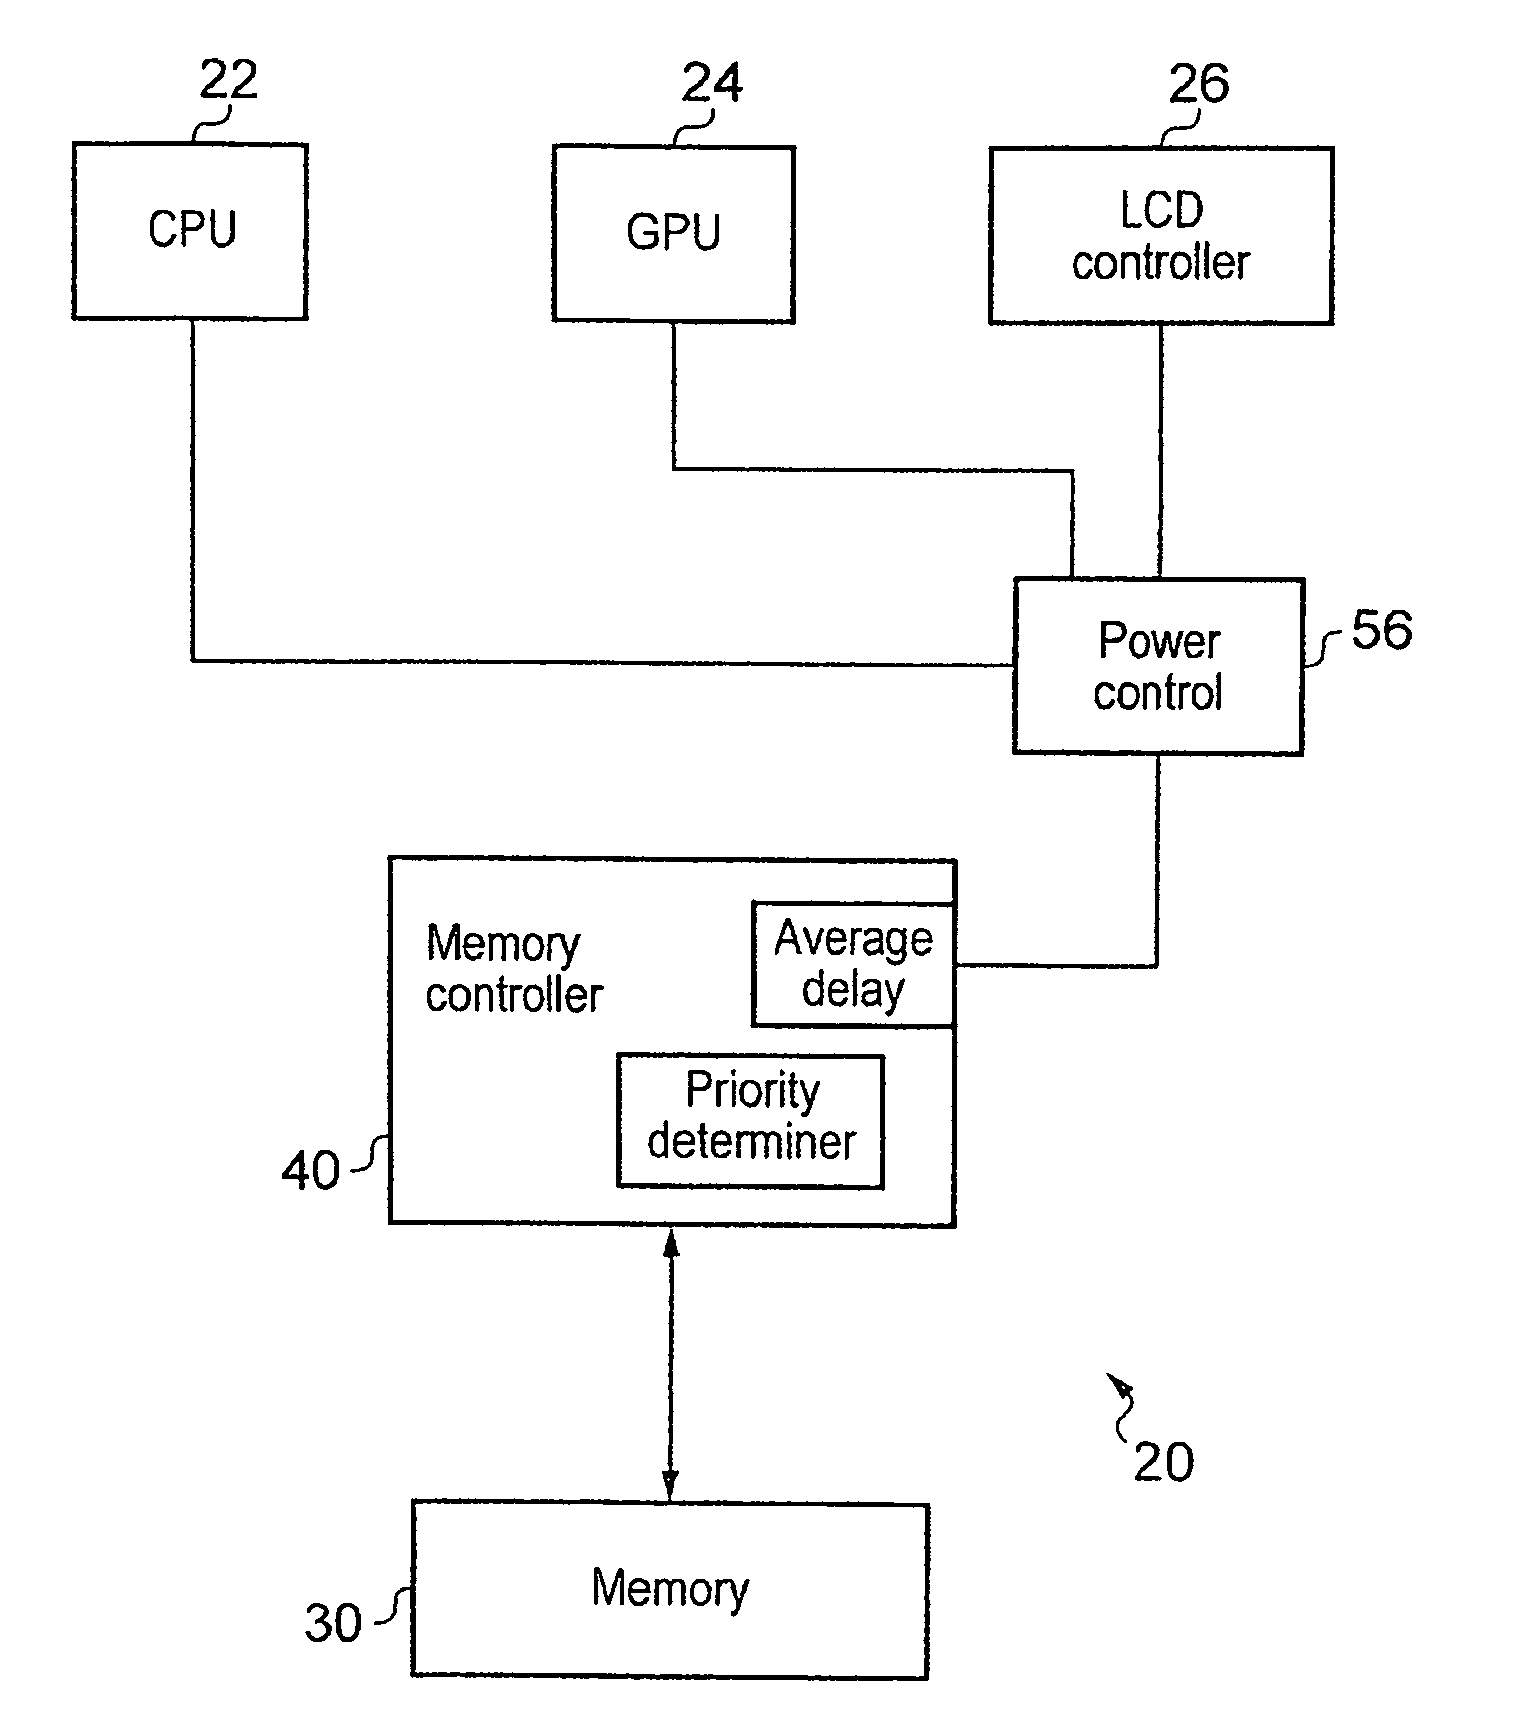 Controlling latency and power consumption in a memory